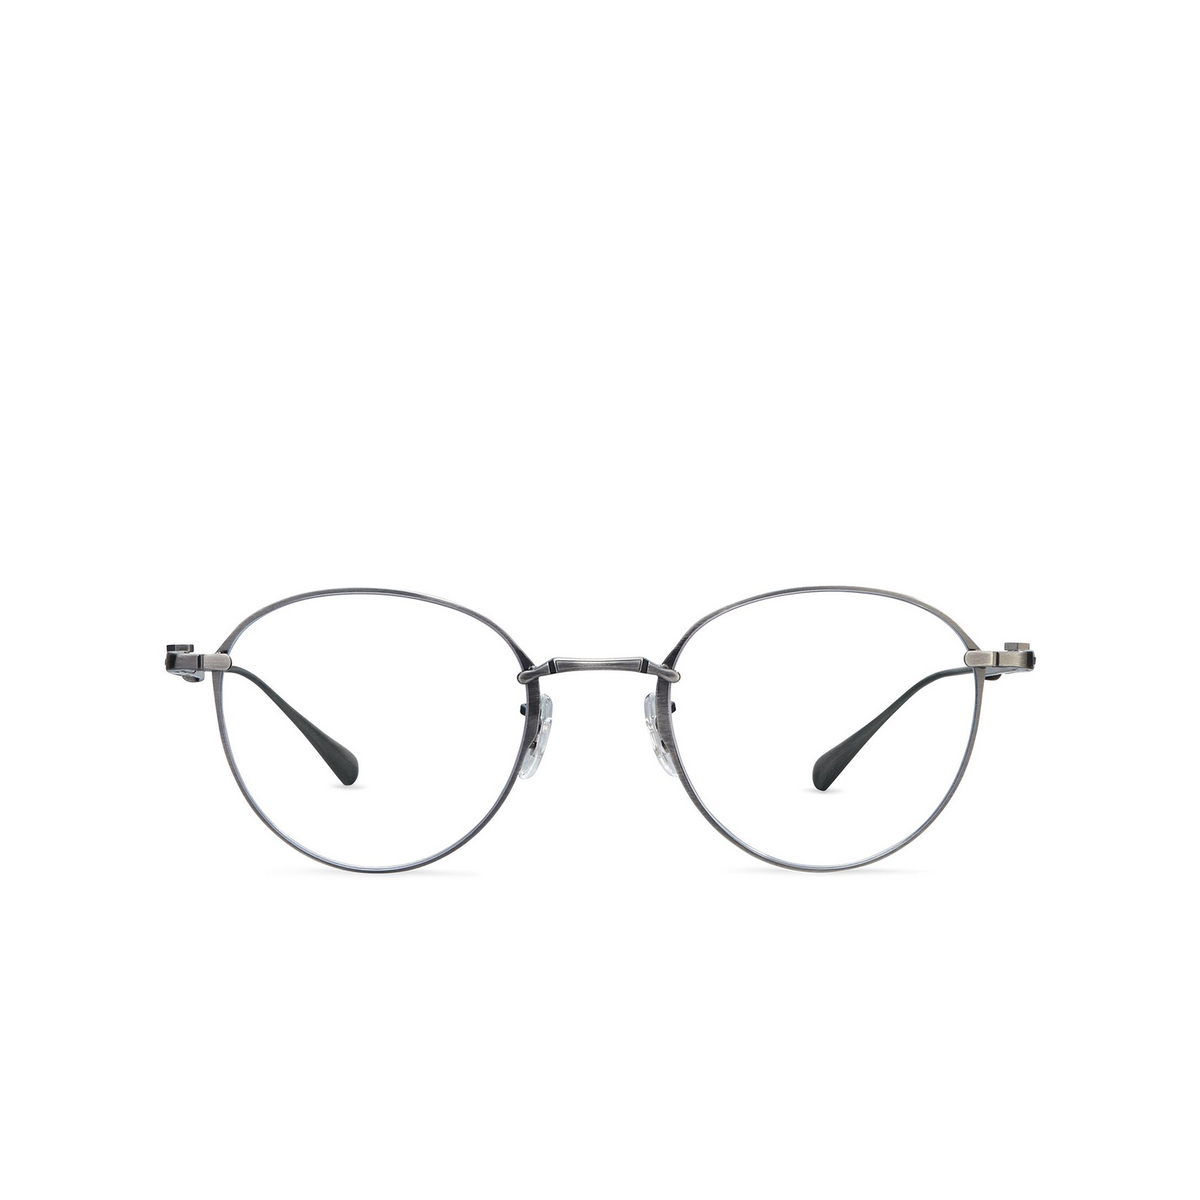 Mr. Leight MULHOLLAND CL Eyeglasses PW-GRYSTN Pewter-Greystone - front view